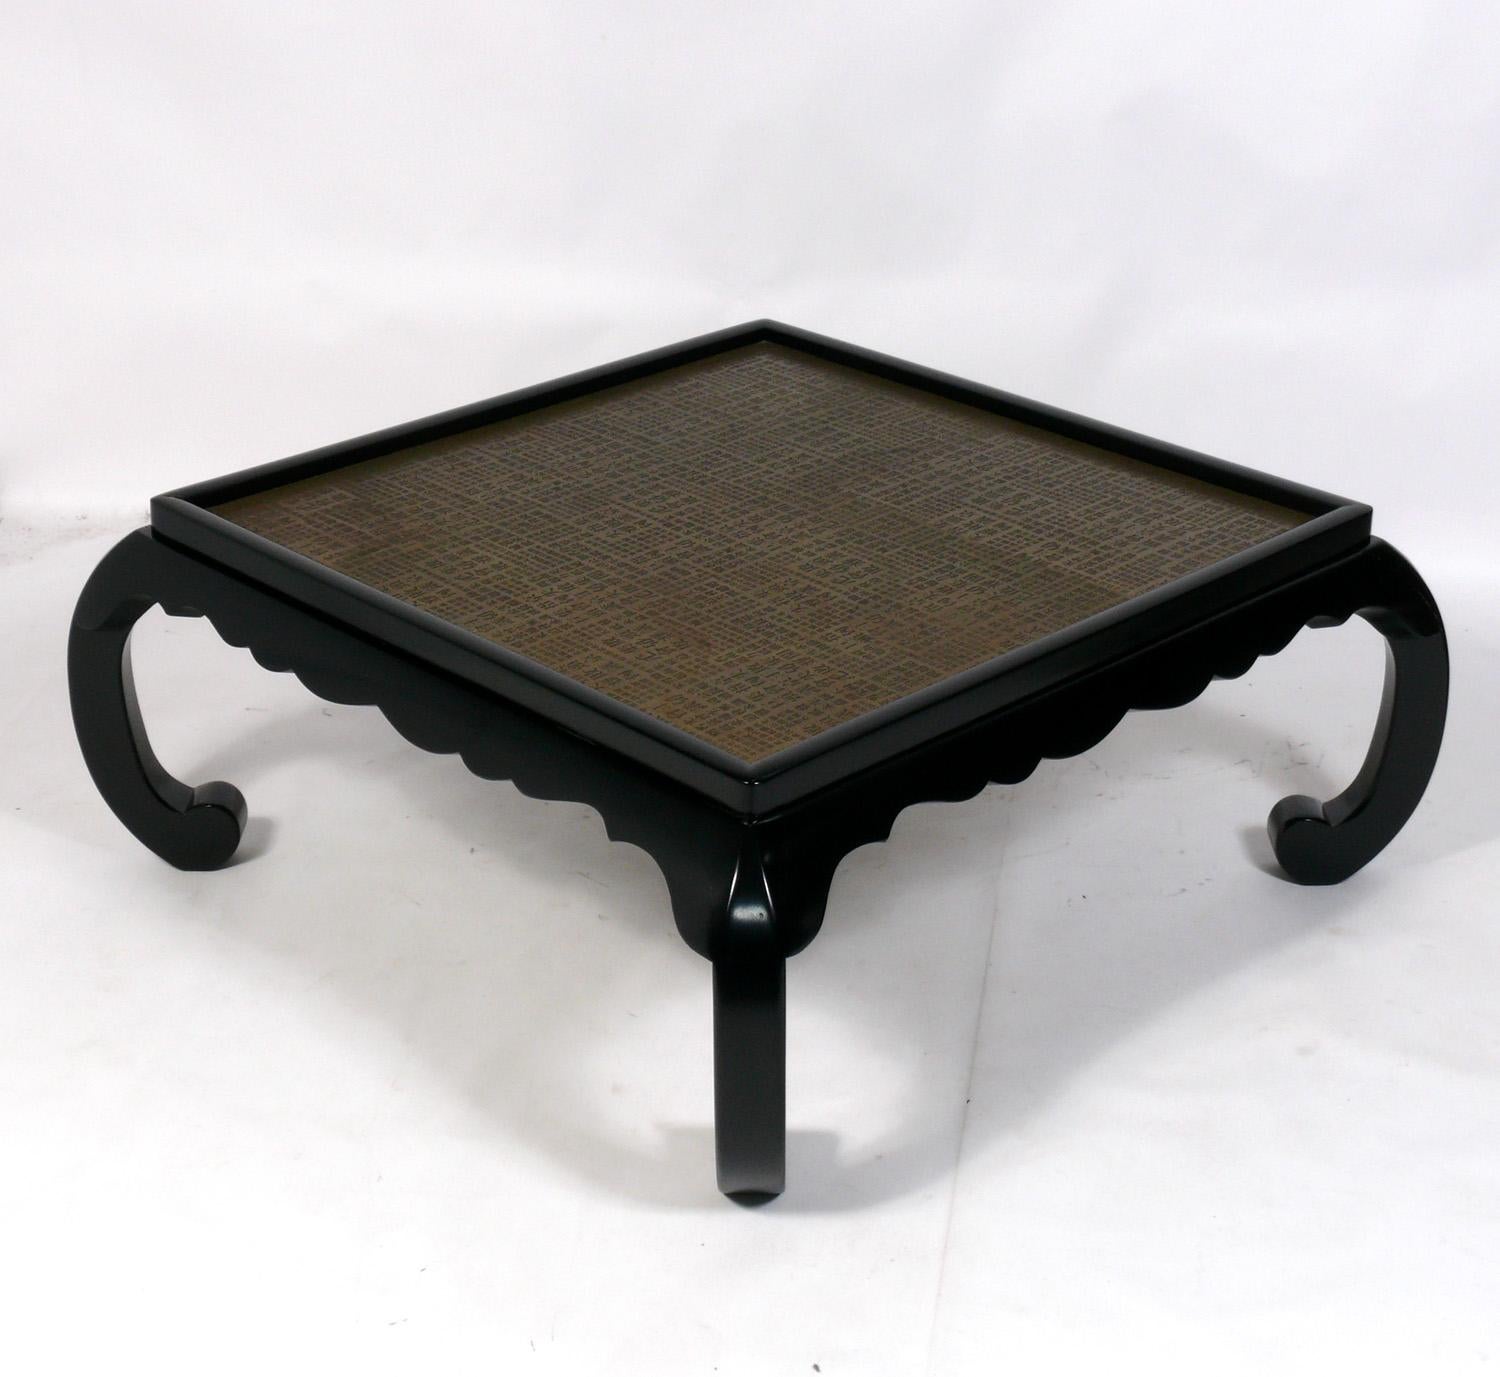 Elegant brass and black Lacquer coffee table, in the manner of Philip and Kelvin Laverne, American, circa 1960s. The black lacquer wood frame has been recently refinished and the brass top imprinted with Chinese characters retains it's warm original